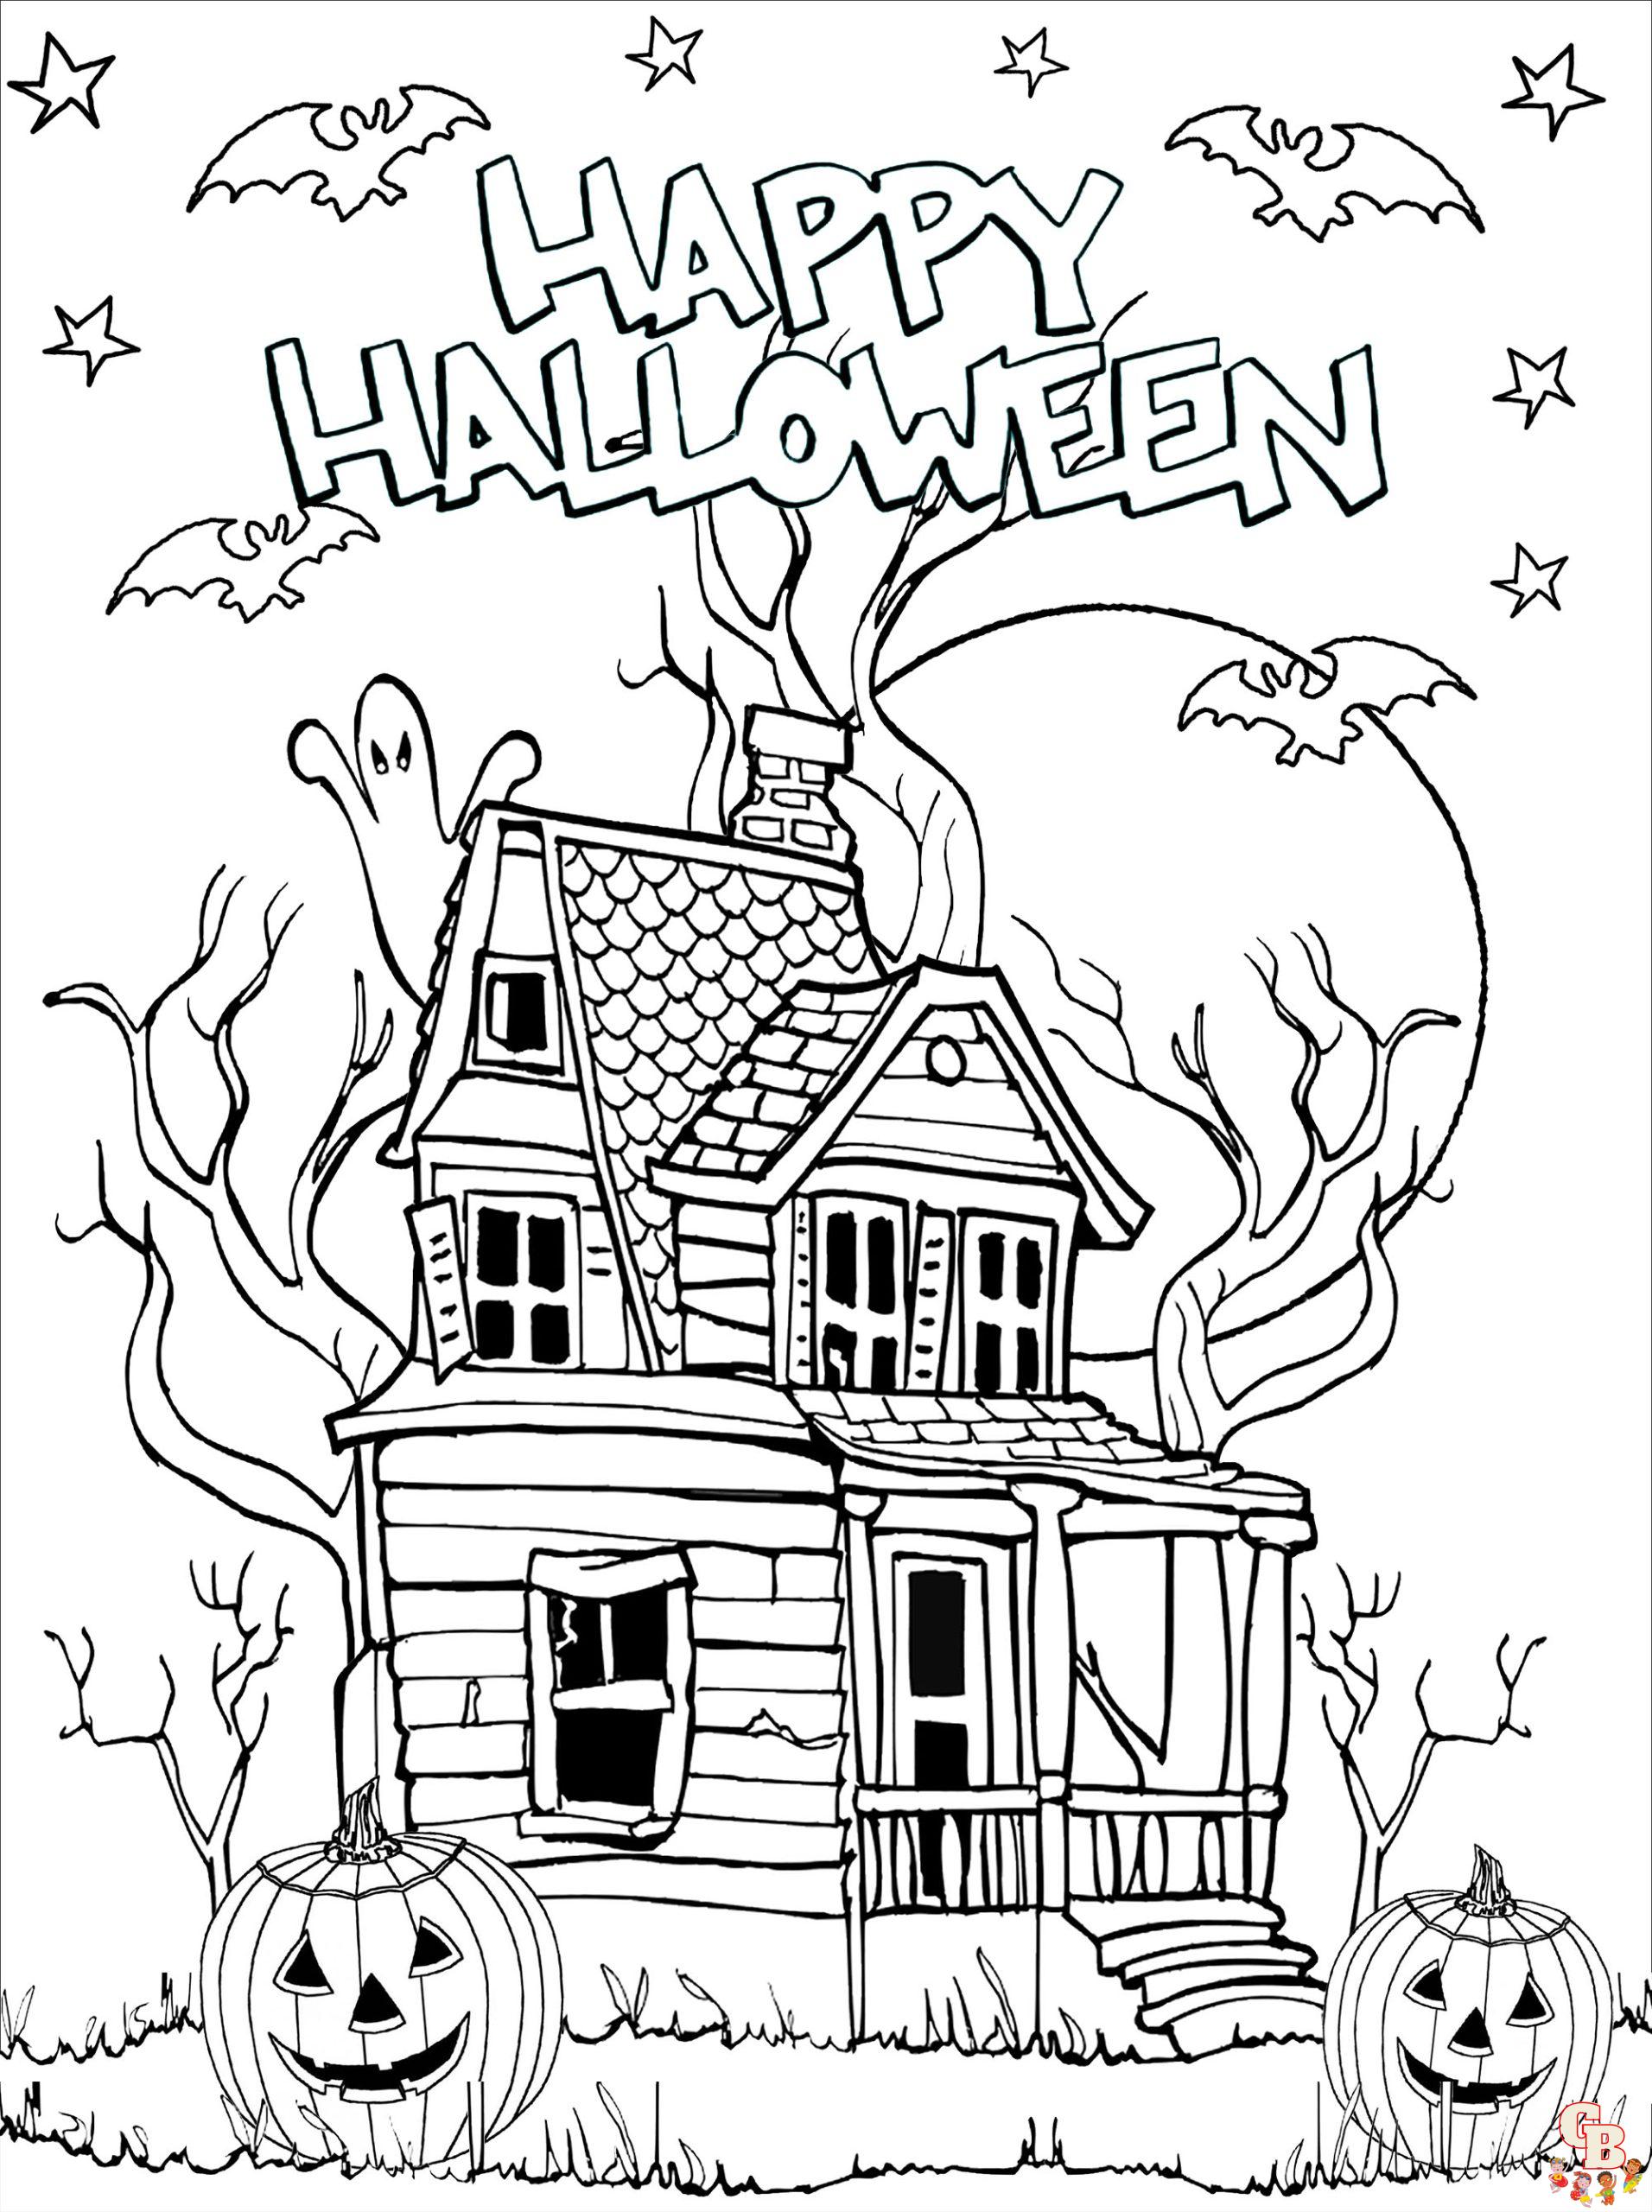 Scared Face Coloring Page - Get Coloring Pages